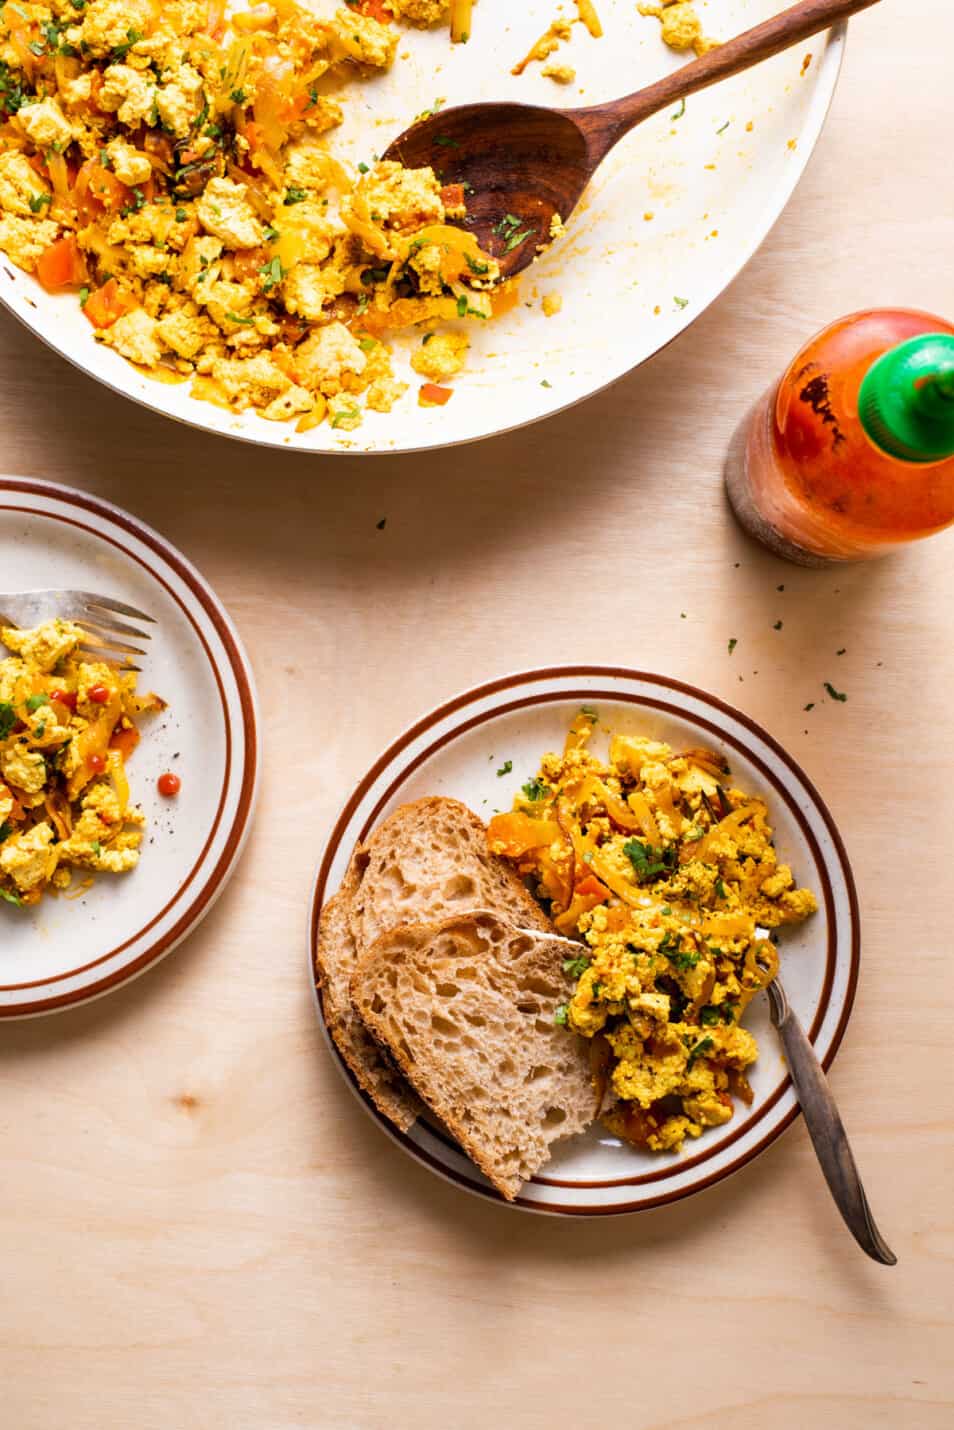 Vegan brunch recipe for tofu scramble with onions and tomatoes on a plate with toast next to sriracha.